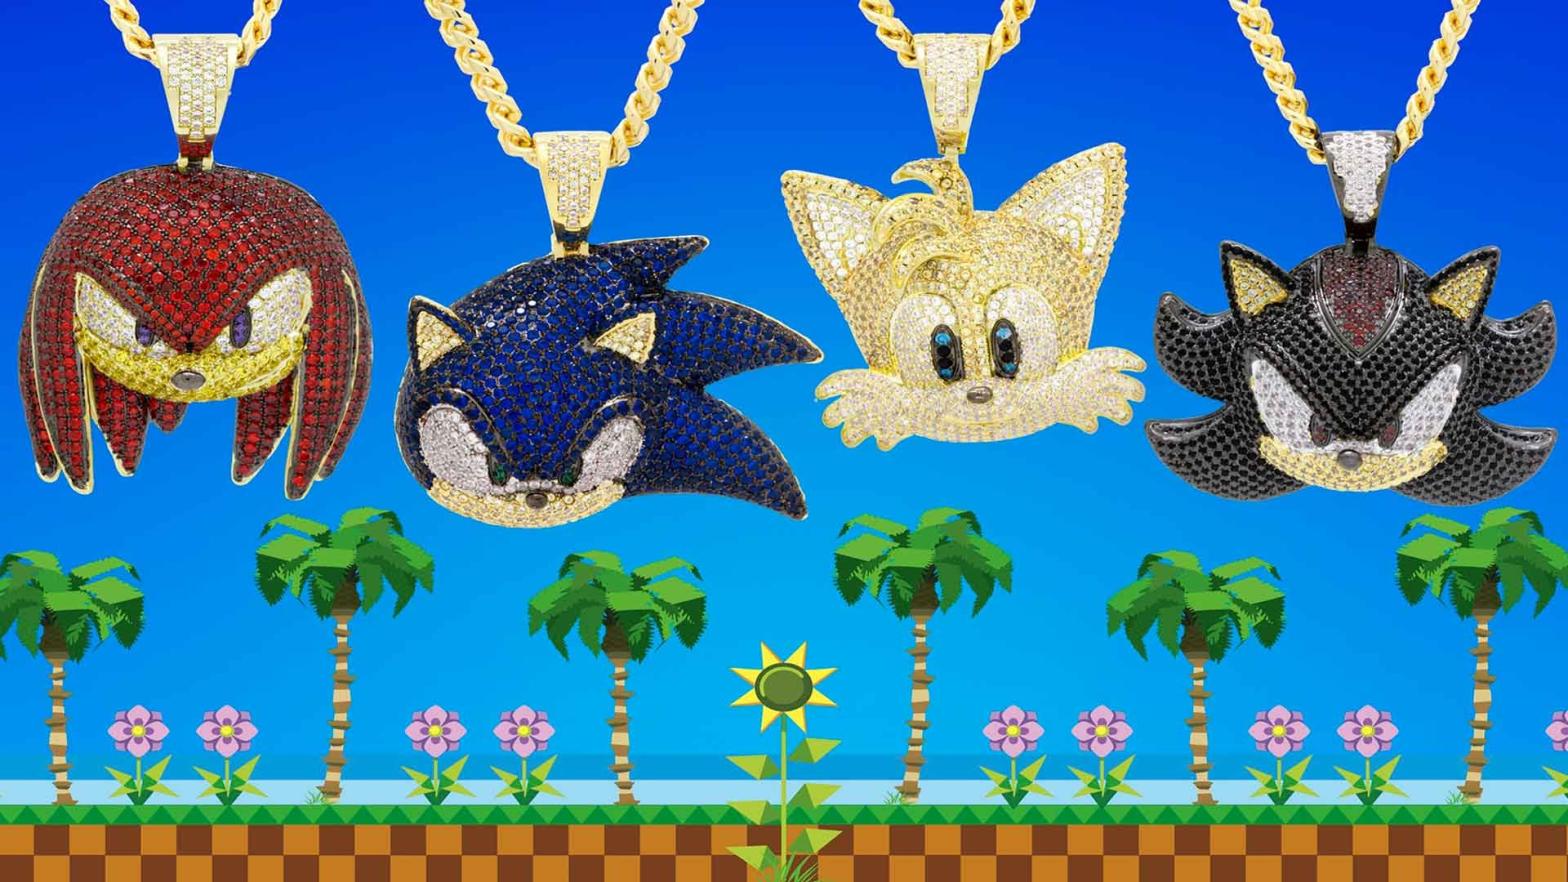 Thanks Sega, but if I'm going to own an iced-out anything, It'd be something Sailor Moon.  (Image: Sega)